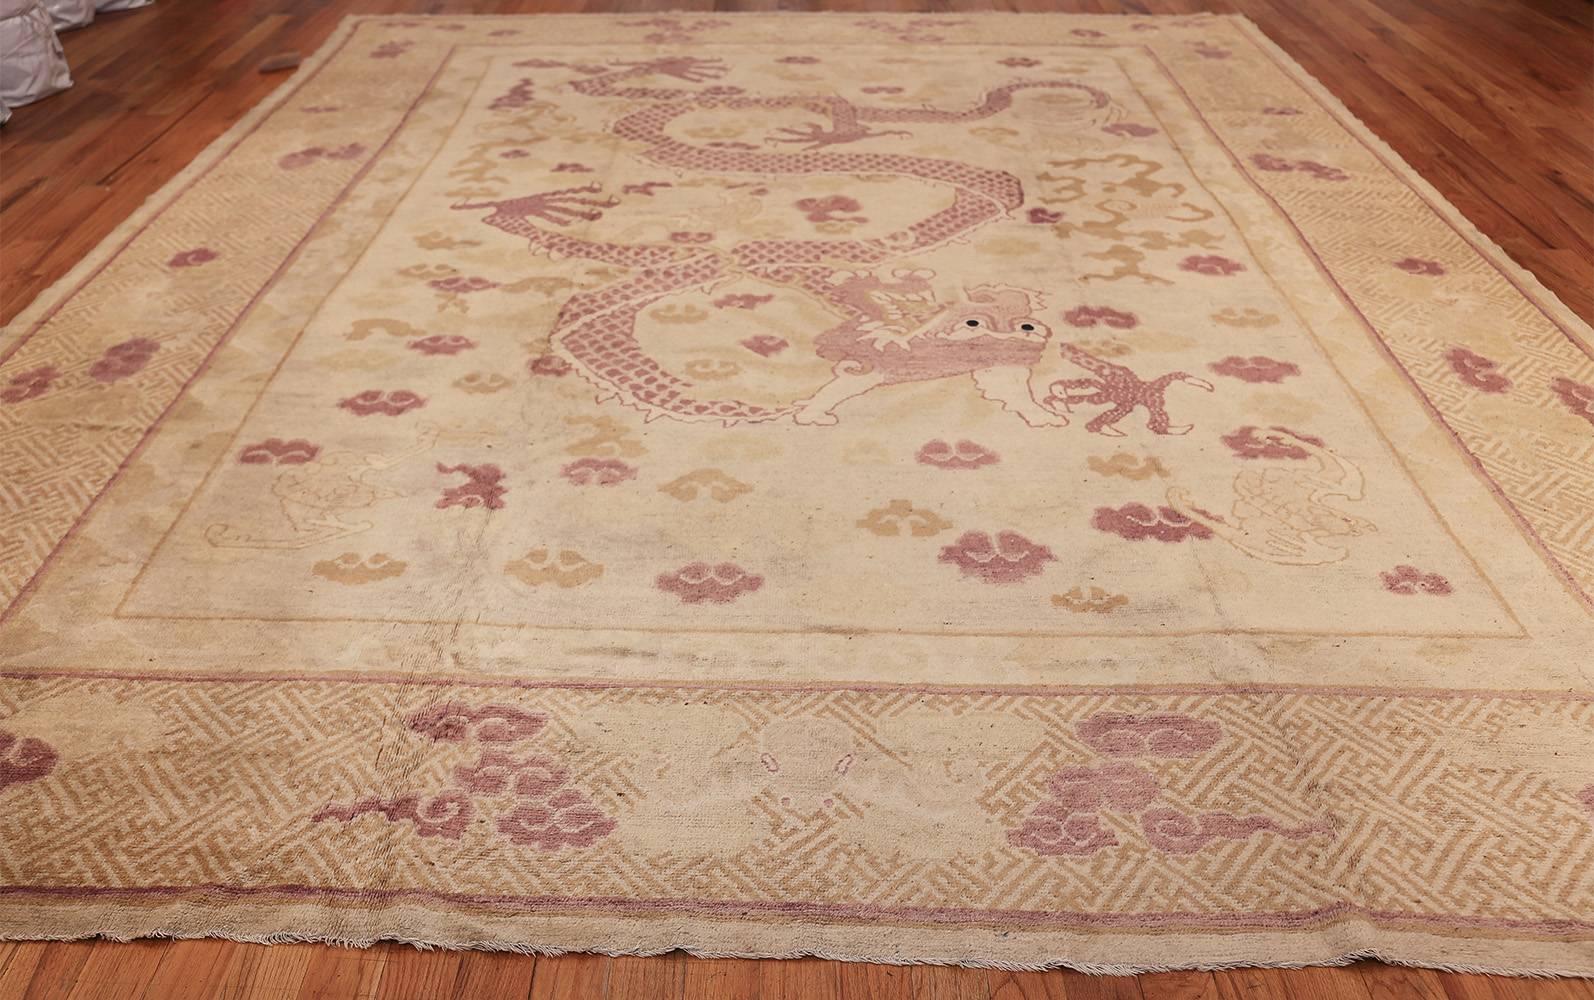 Funky Antique Purple Chinese Dragon Design Rug. Size: 11 ft x 14 ft 1